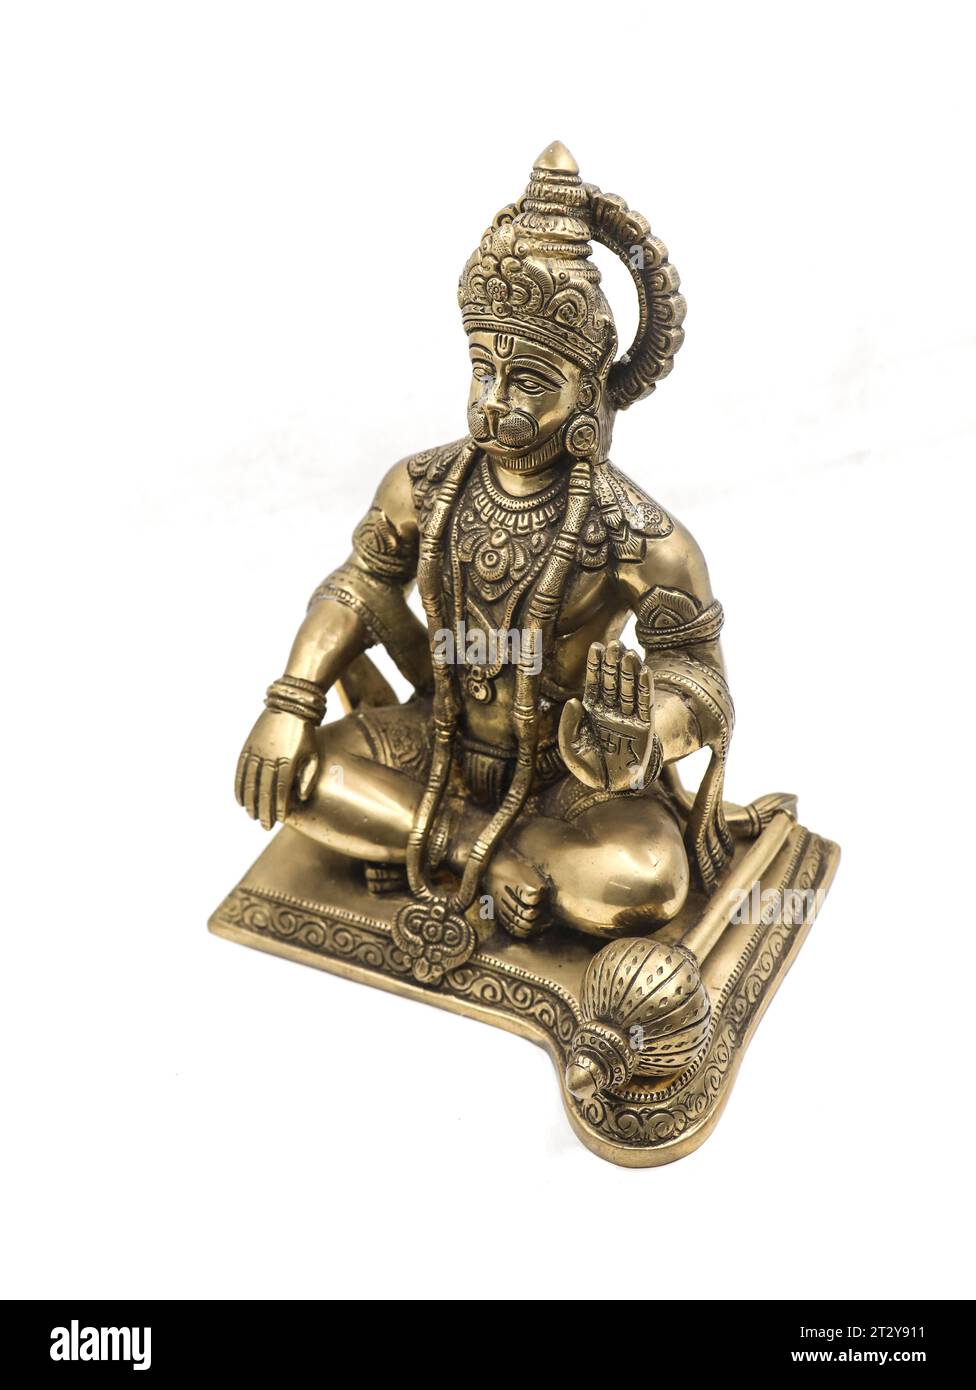 statue of lord hanuman, a monkey god from hindu mythology sitting and blessing made of golden brass isolated in a white background Stock Photo